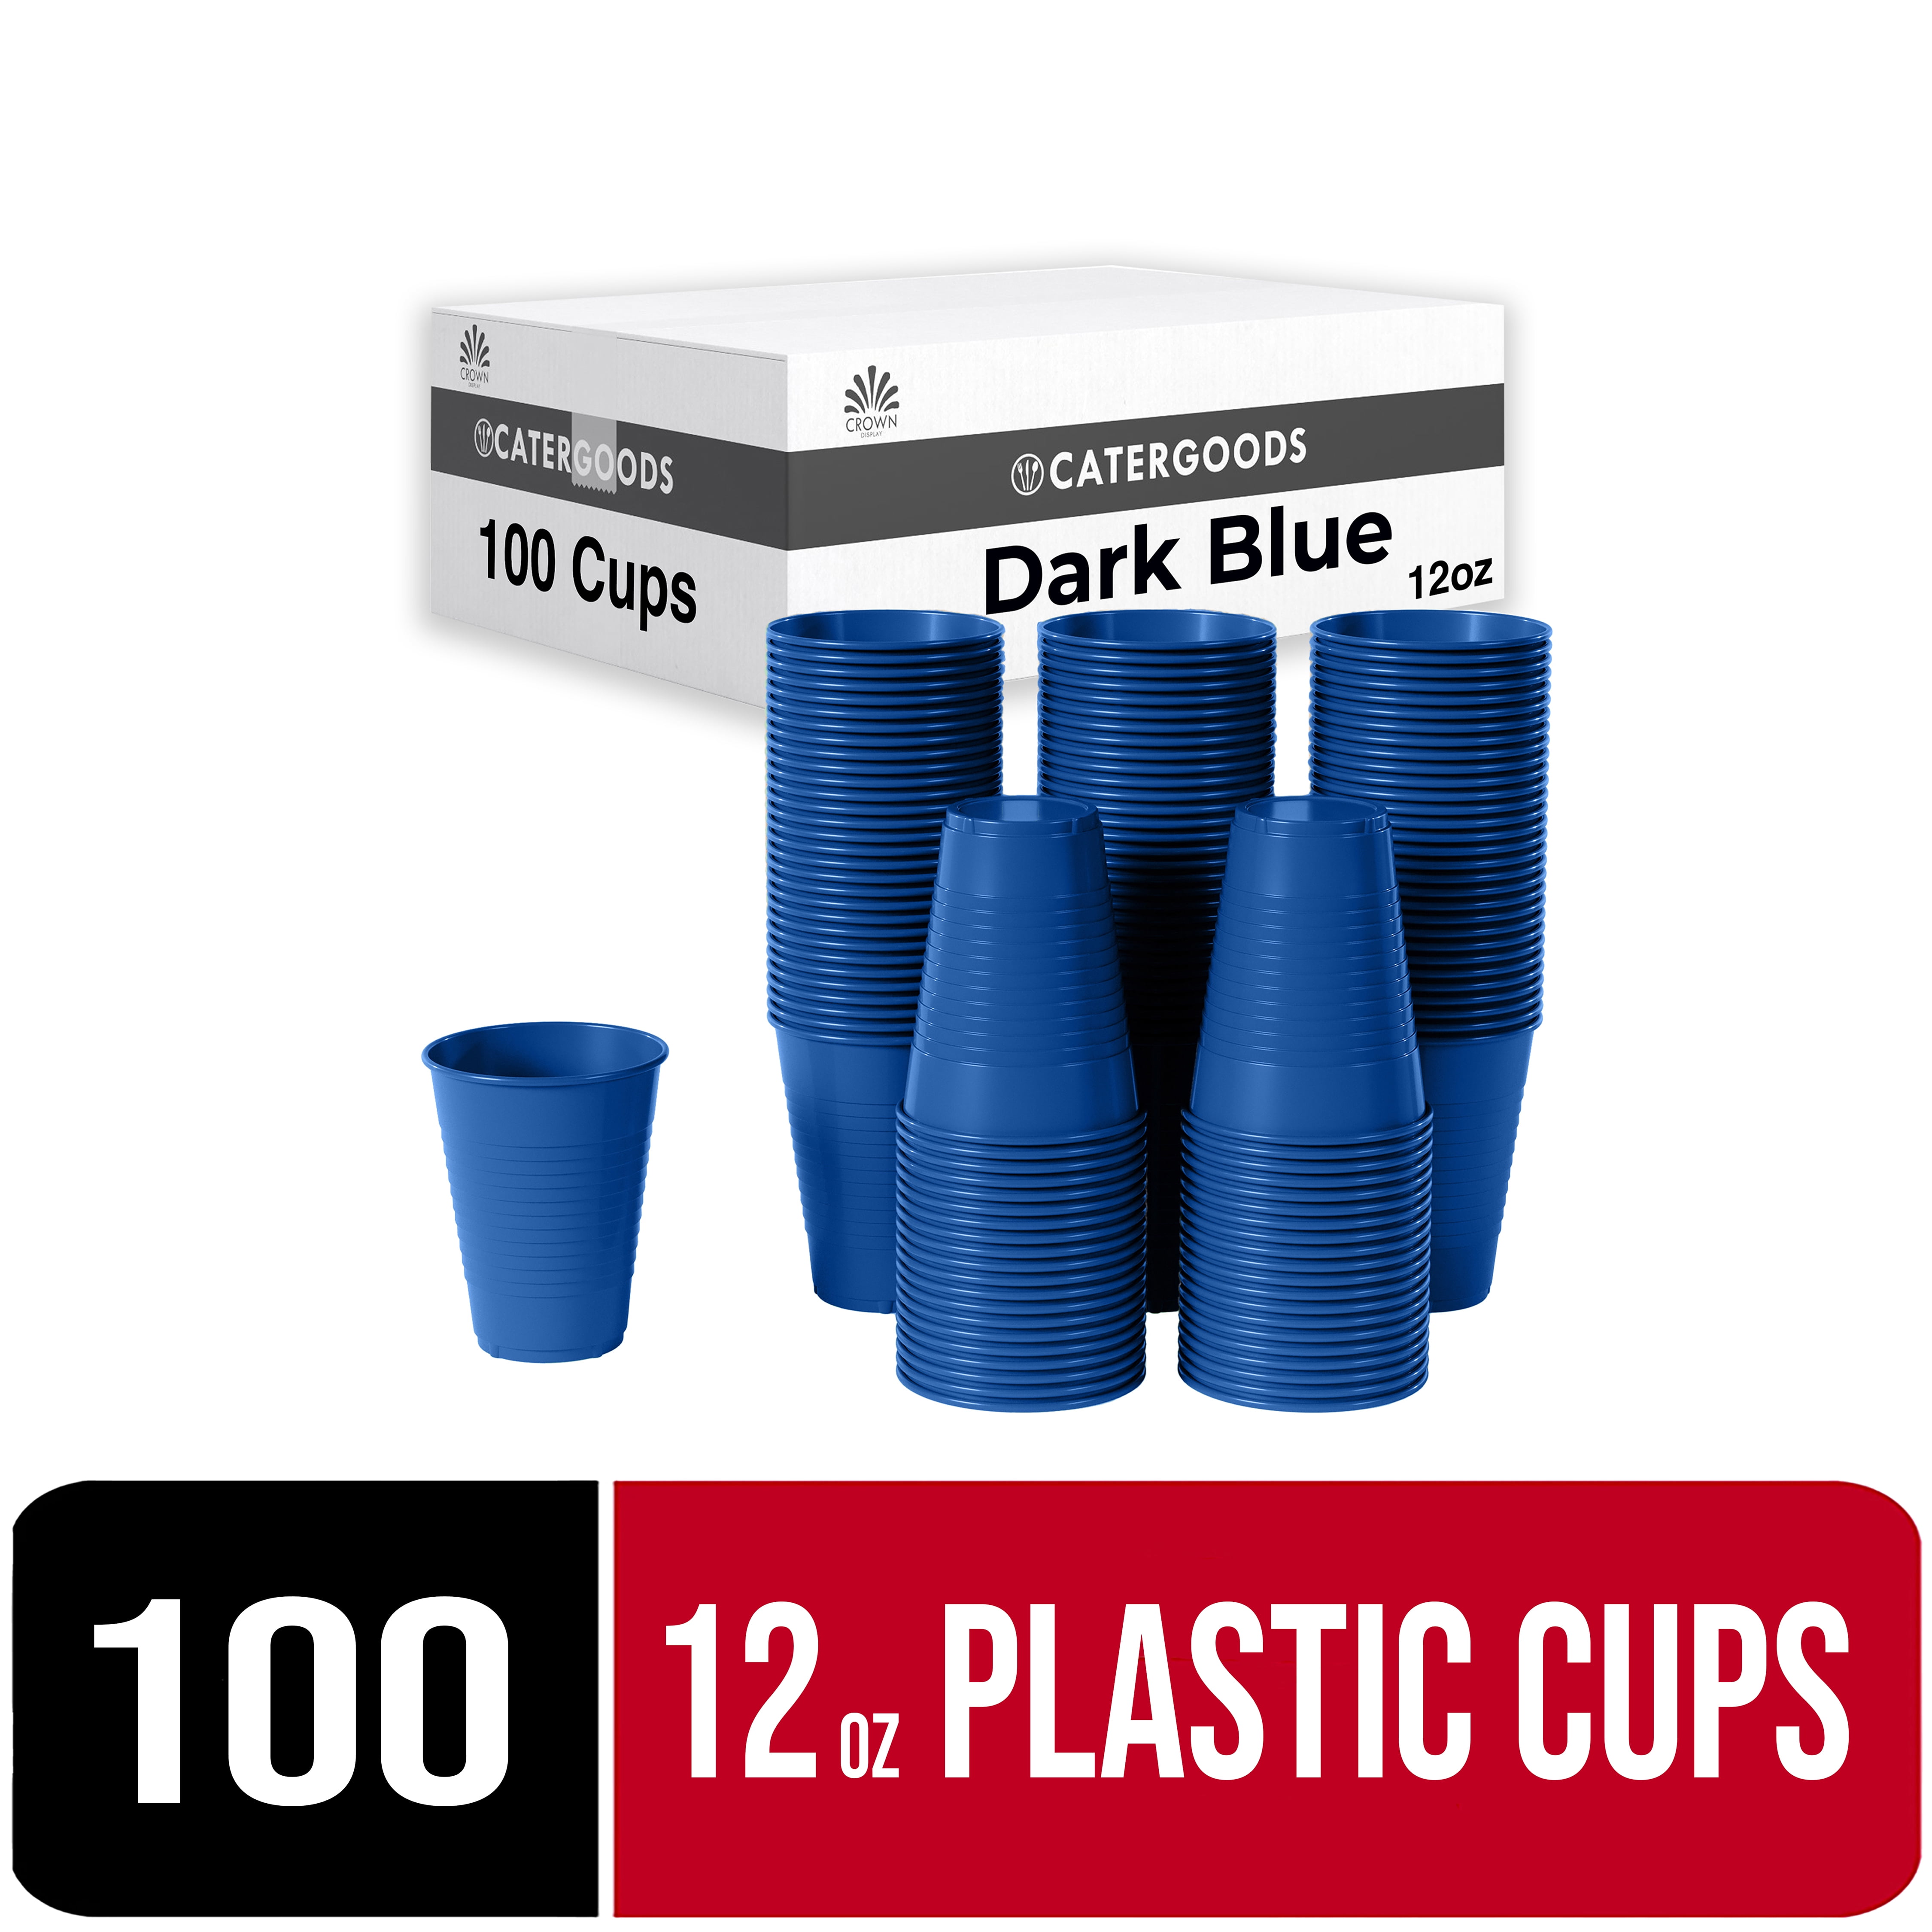 Metallic Patriotic Red, White & Blue Plastic Cups 30ct - Size - 9oz Cup